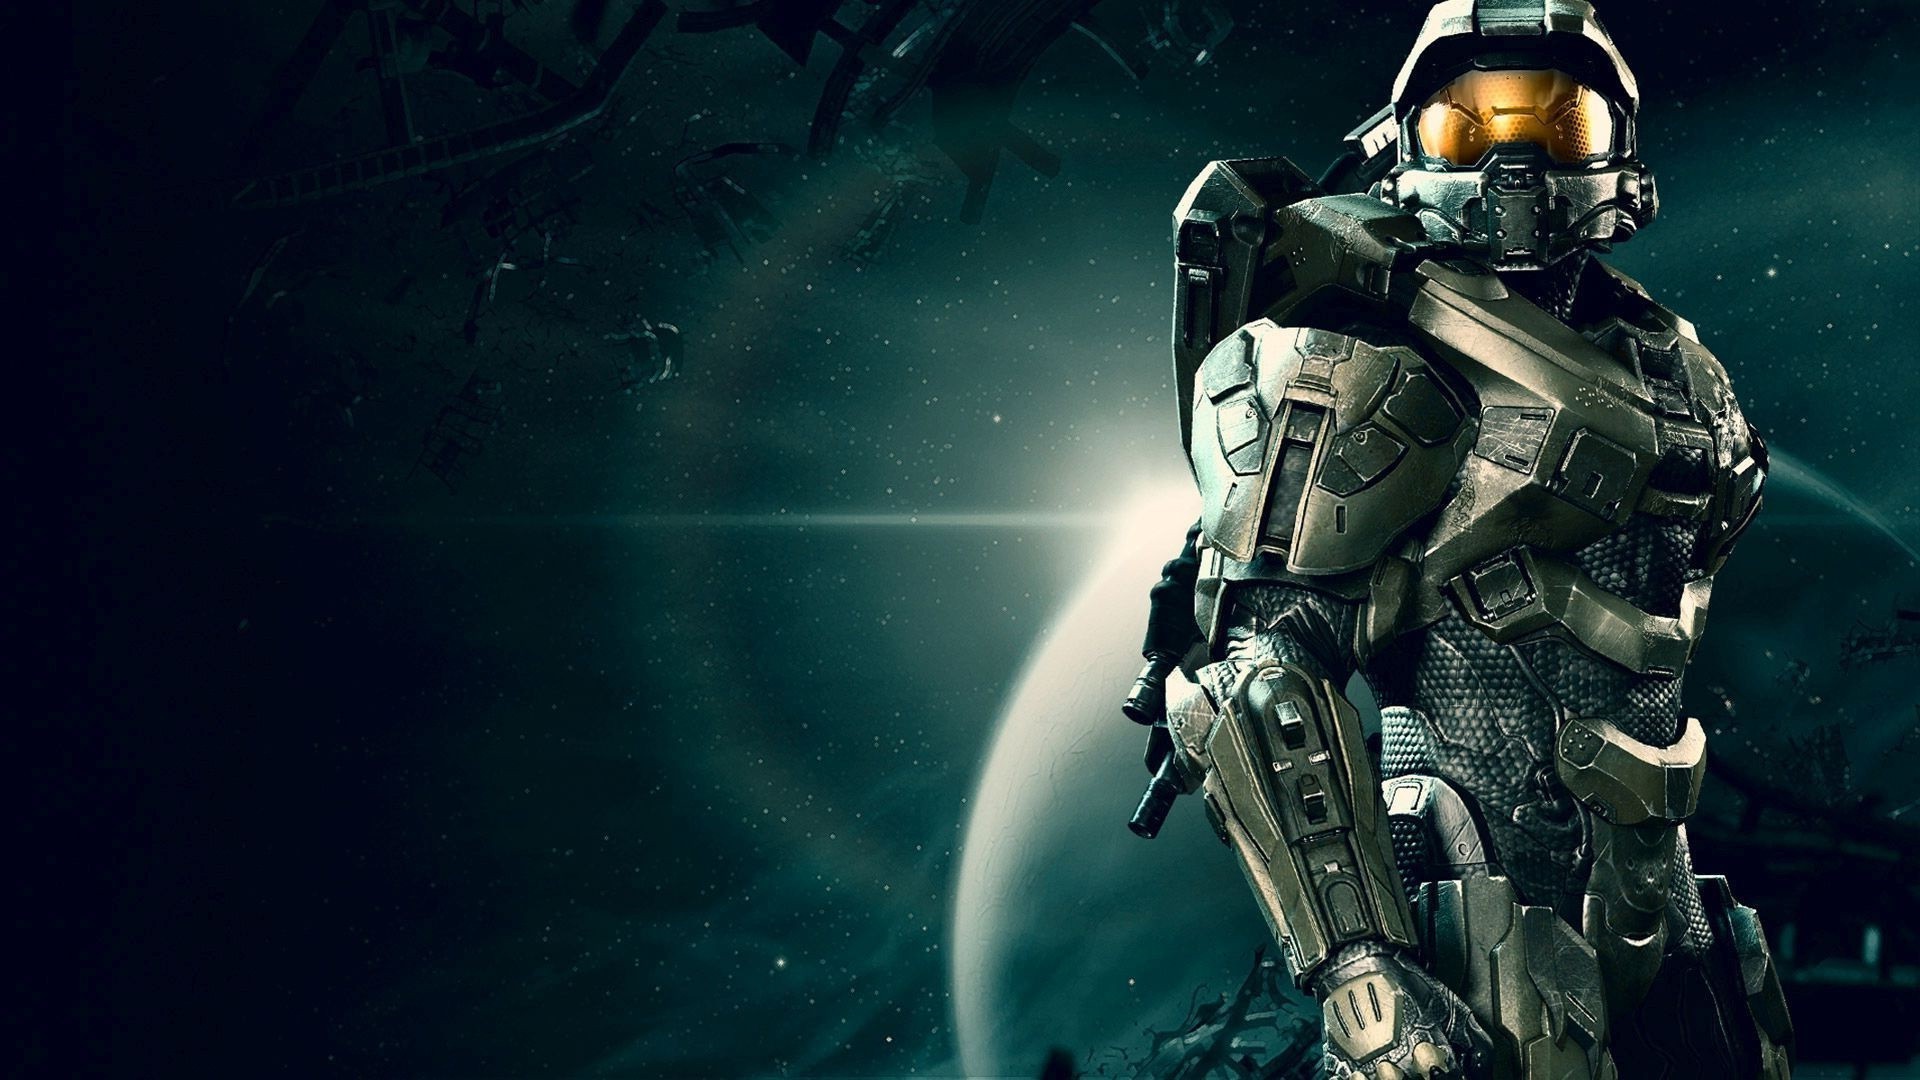 1920x1080 video Games, Halo, Halo 4, Master Chief, UNSC Infinity, 343 Industries,  Spartans, Xbox One Wallpapers HD / Desktop and Mobile Backgrounds